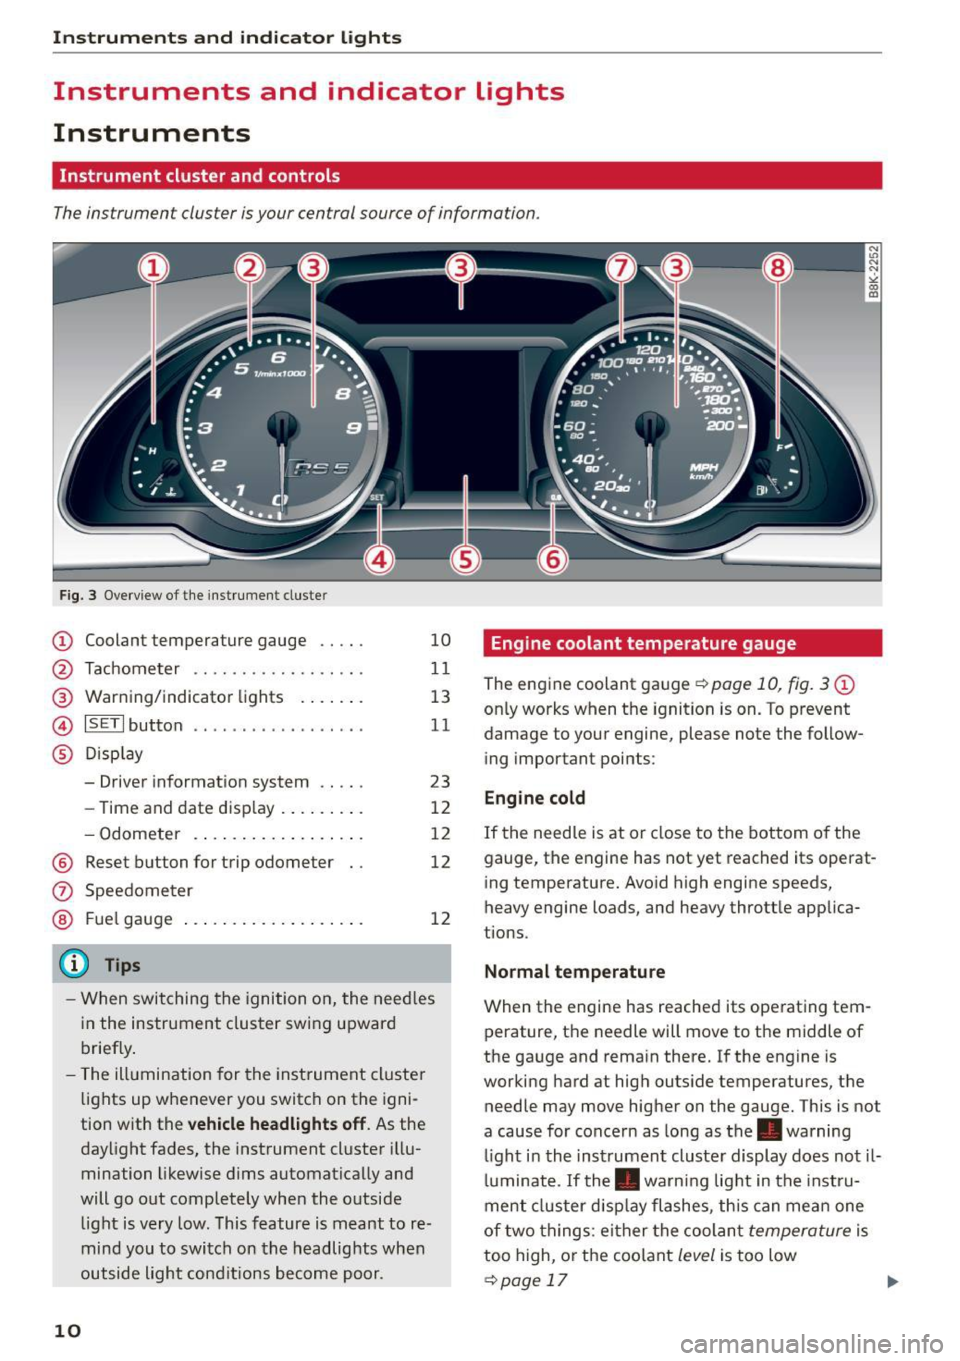 AUDI RS5 COUPE 2015  Owners Manual Instruments  and  indicator  Lights 
Instruments  and  indicator  Lights 
Instruments 
Instrument  cluster  and  controls 
The instrument  cluster  is your  central source  of  information. 
Fig.  3  